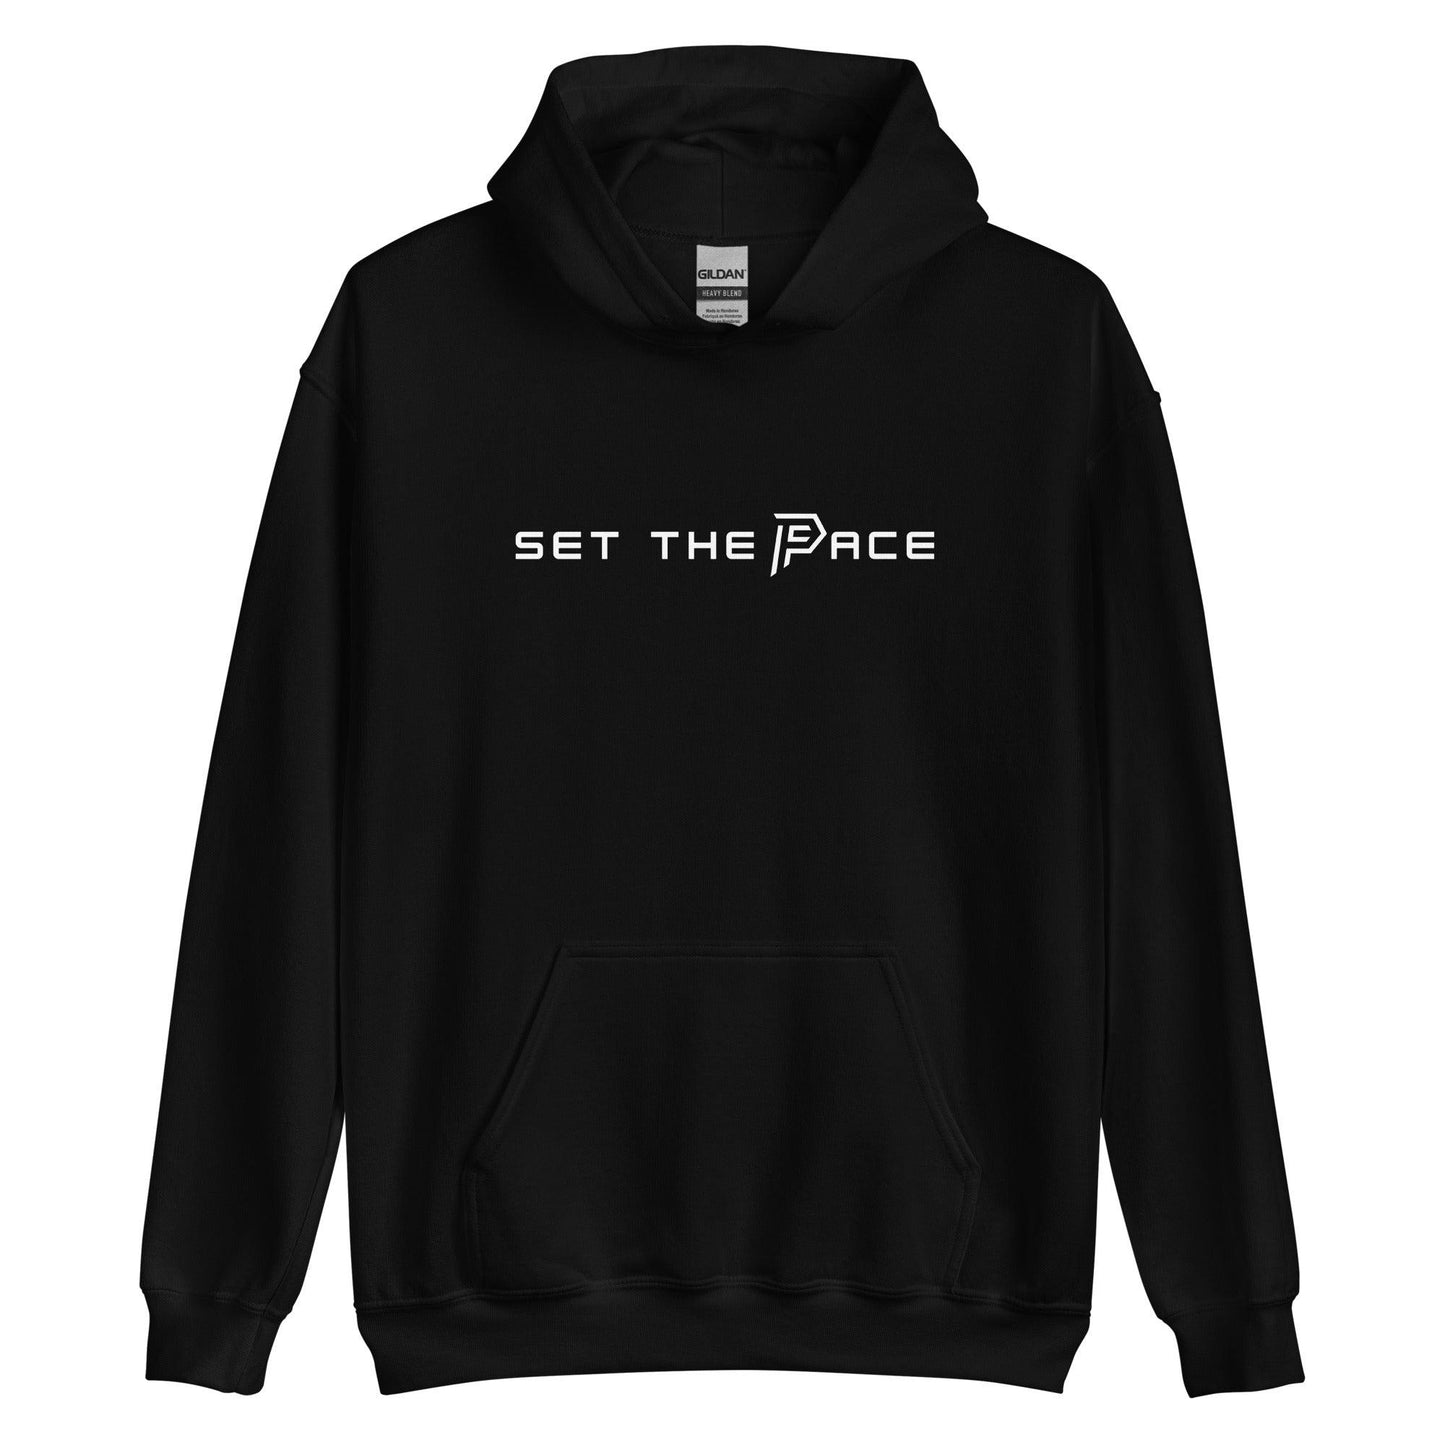 Court Prowess "Set The Pace" Hoodie - Fan Arch